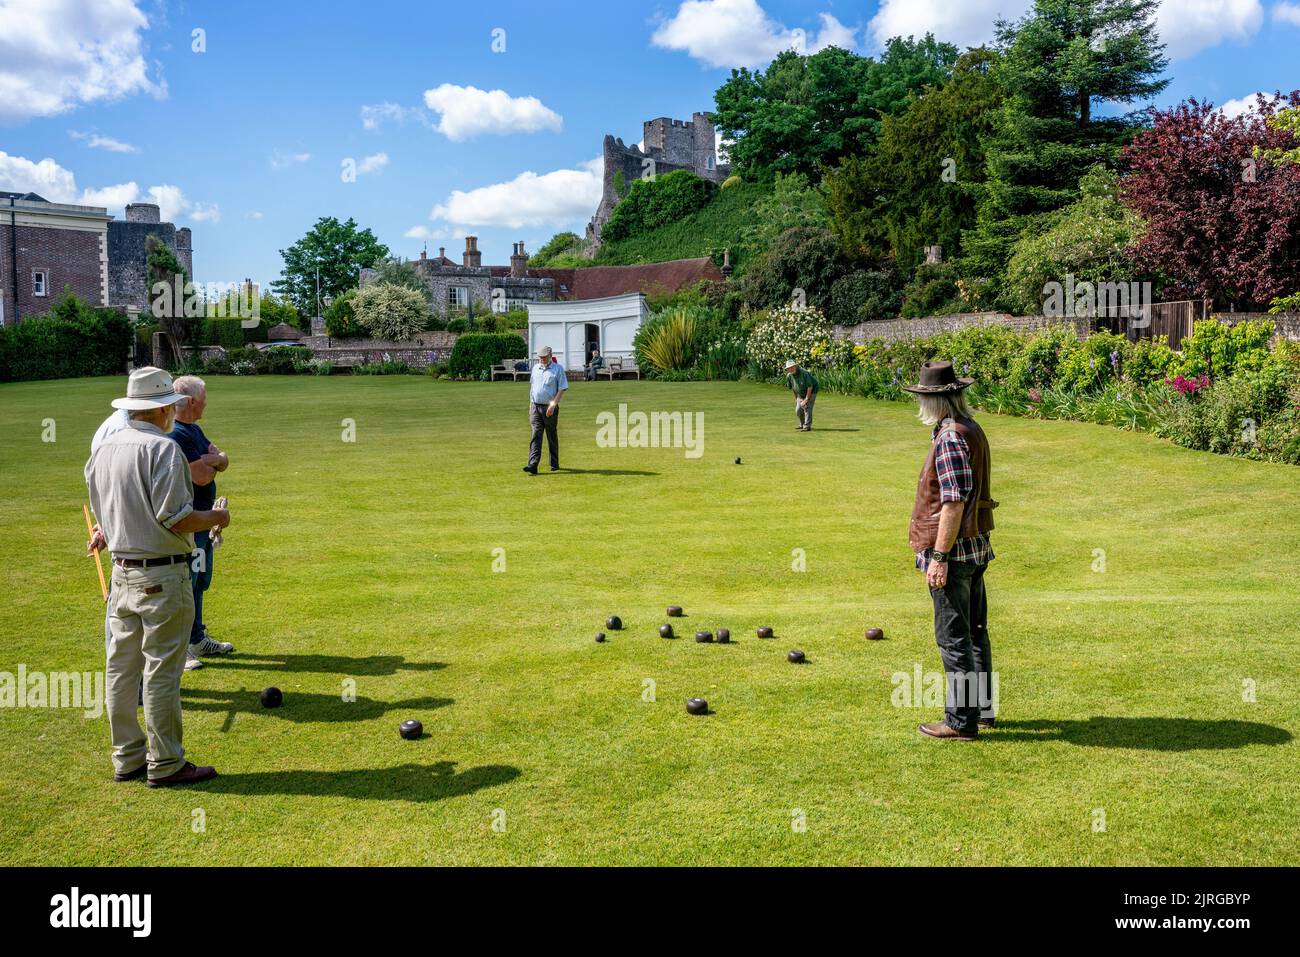 Local Men Play A Traditional Type Of Bowls That Was Played In The Middle Ages, Lewes, East Sussex, UK. Stock Photo